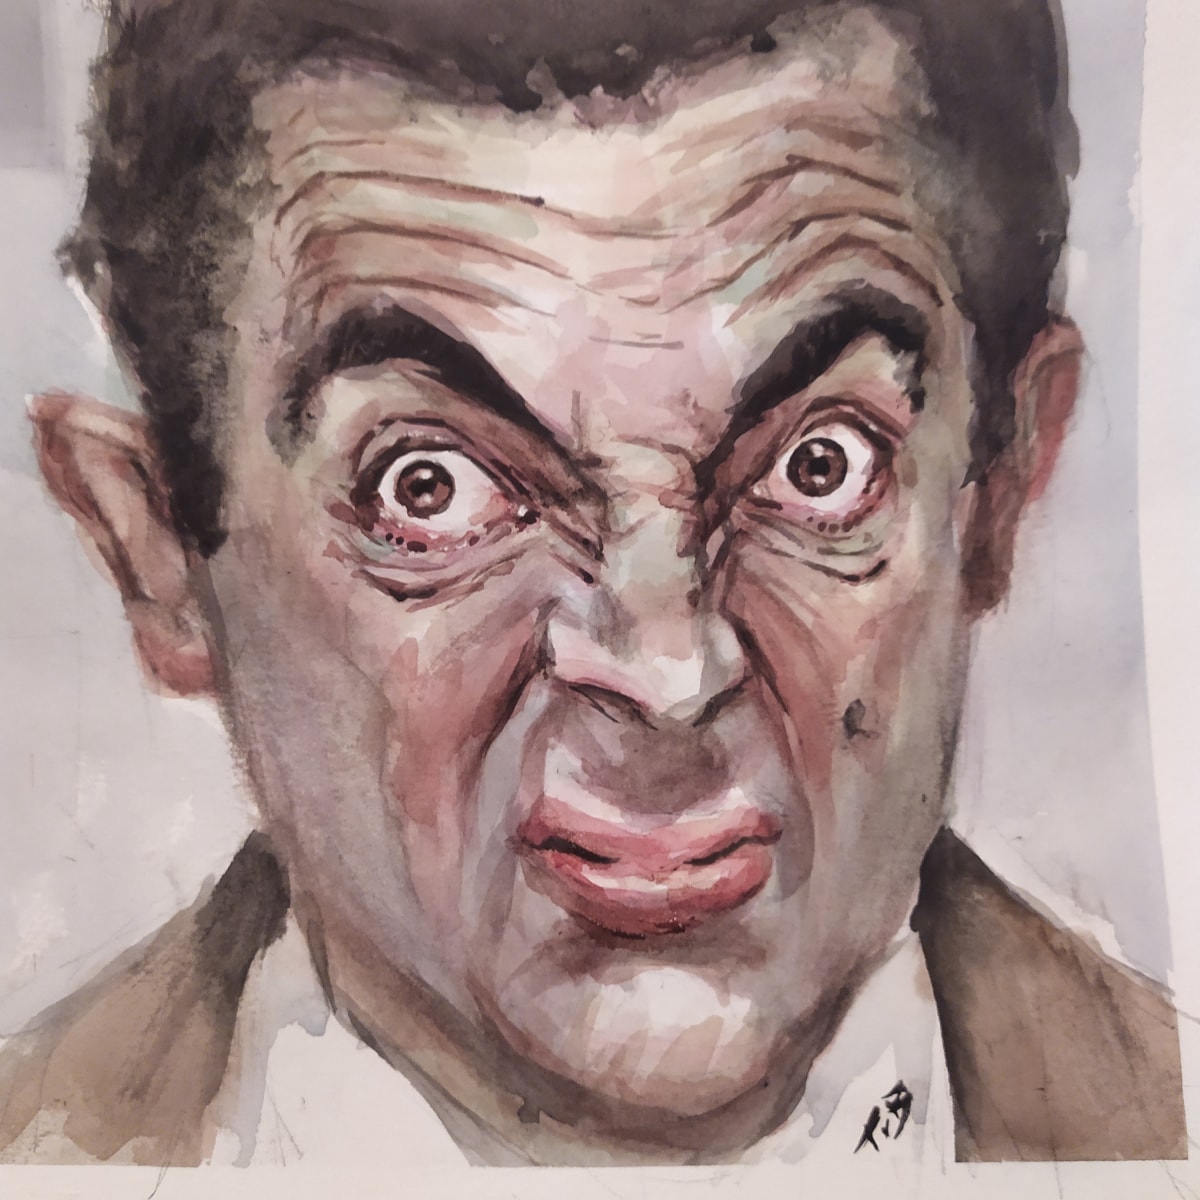 mr. bean copied from a great caricaturist | Freelancer